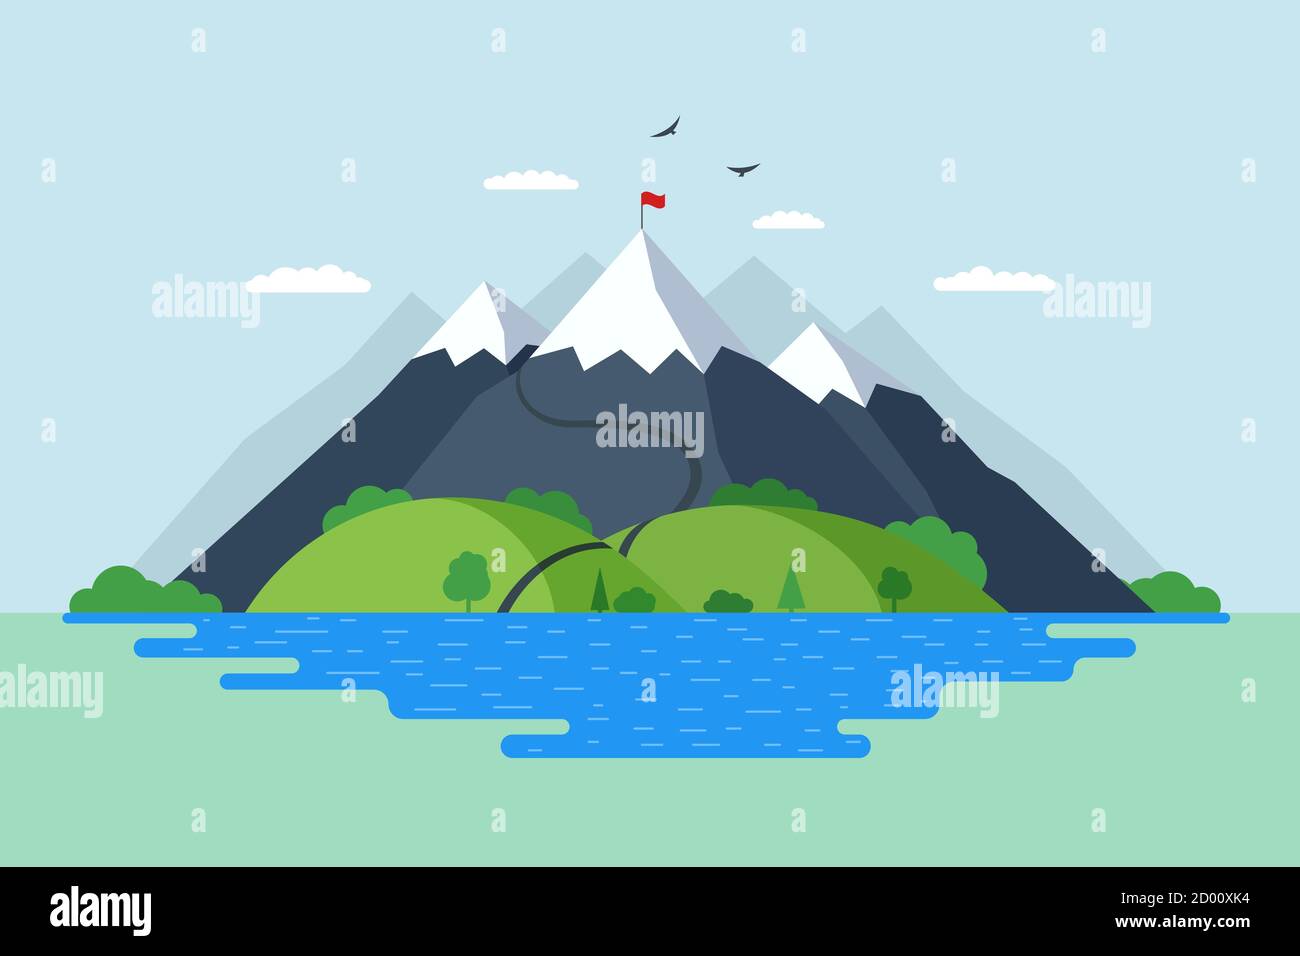 High mountain with green hills forest and blue lake nature landscape. Climbers route trail to rock top and red flag on peak. Victory achievement and overcoming difficulties symbol vector illustration Stock Vector